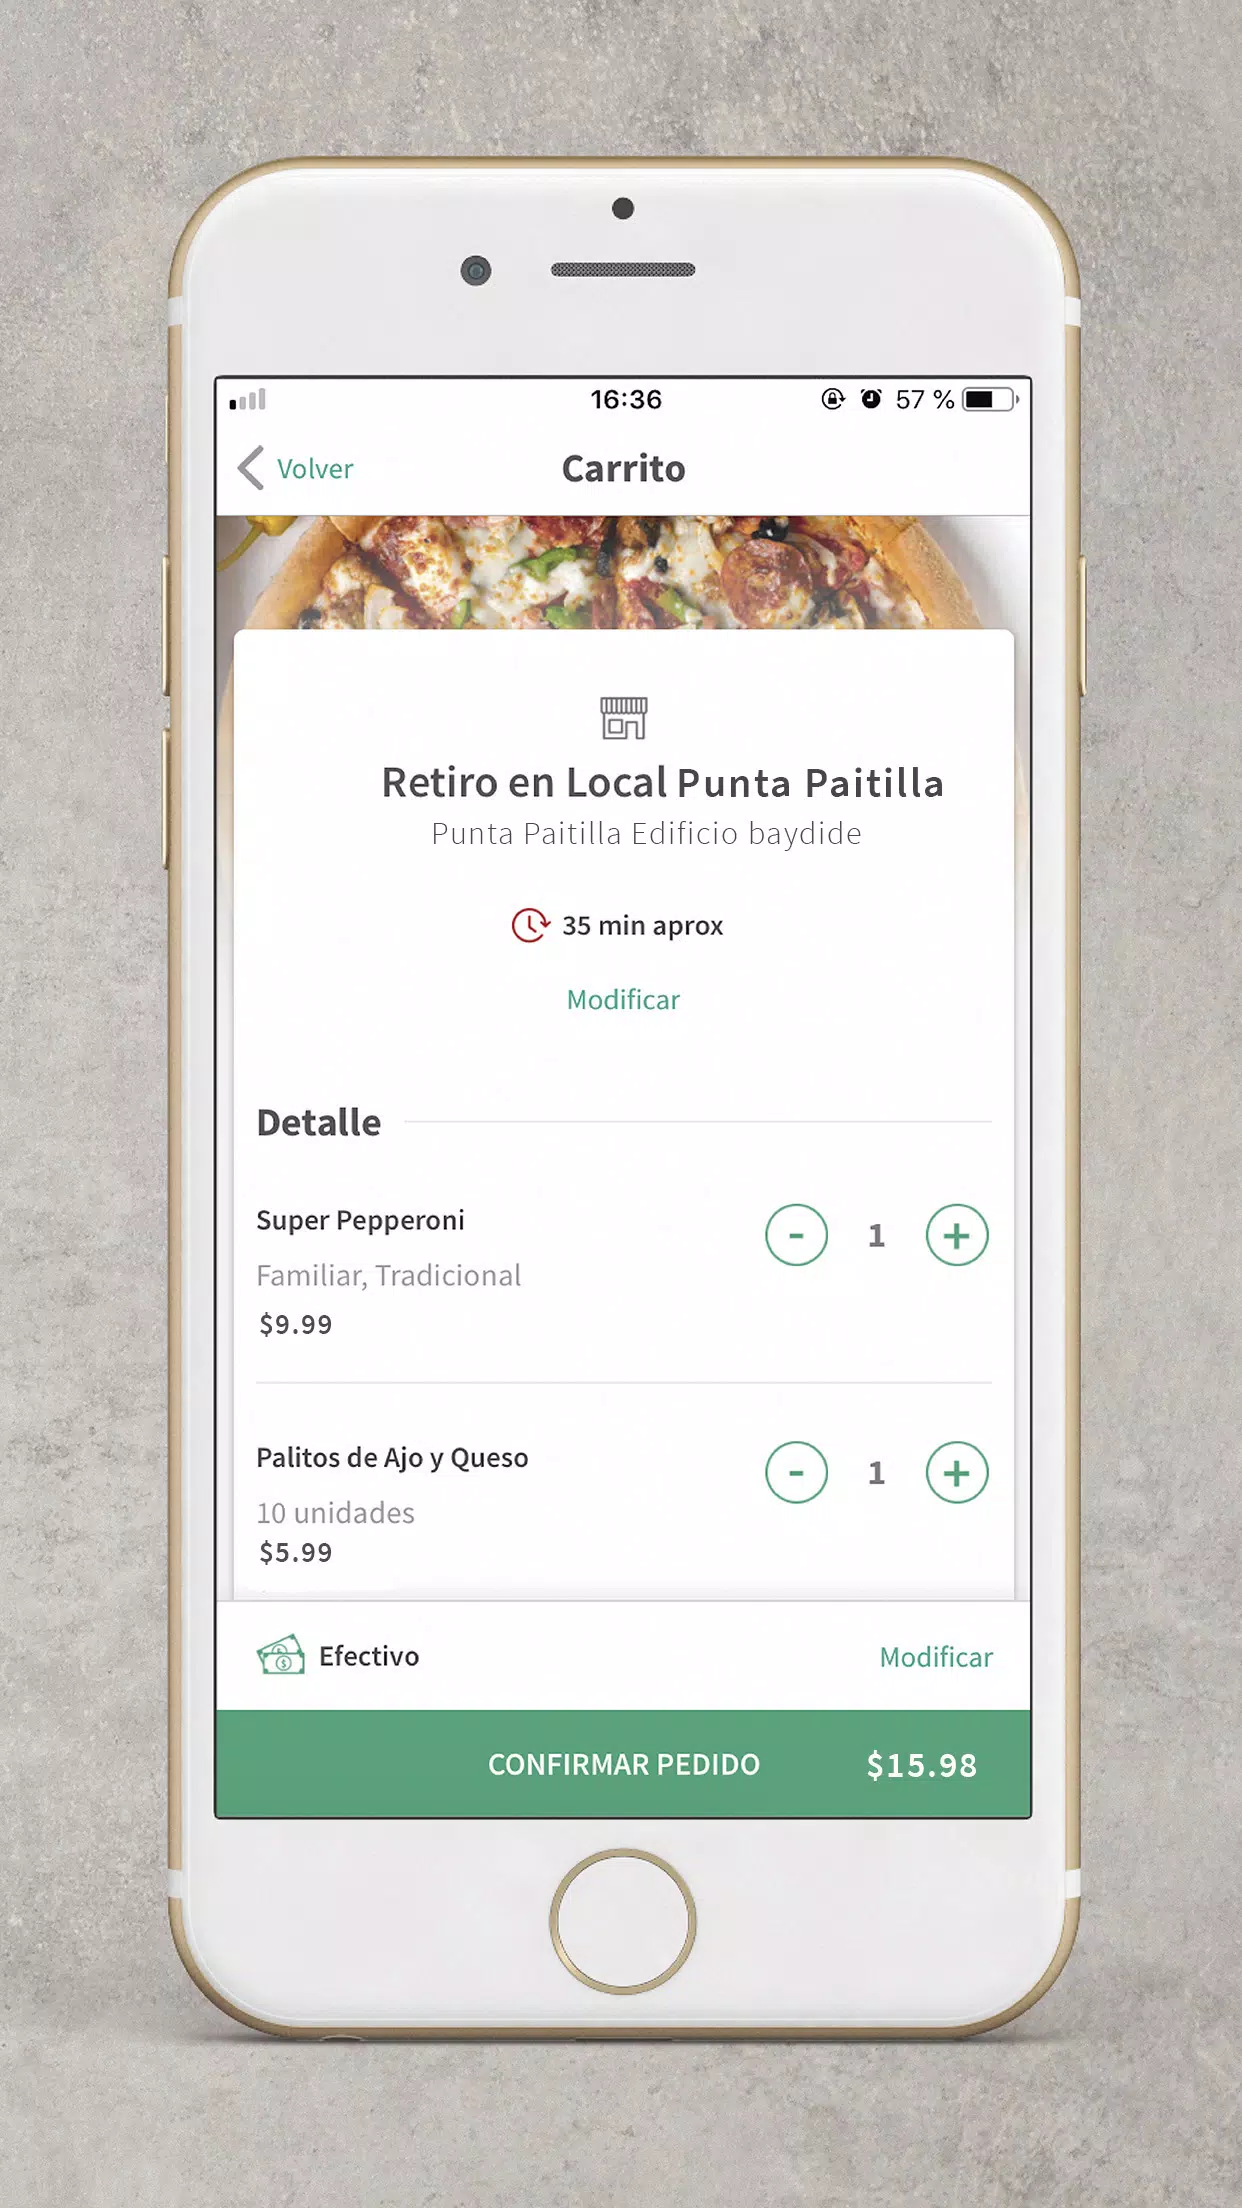 Papa Johns Pizza & Delivery Apk Download for Android- Latest version 3.2.2-  uk.co.papajohns.ppjqg